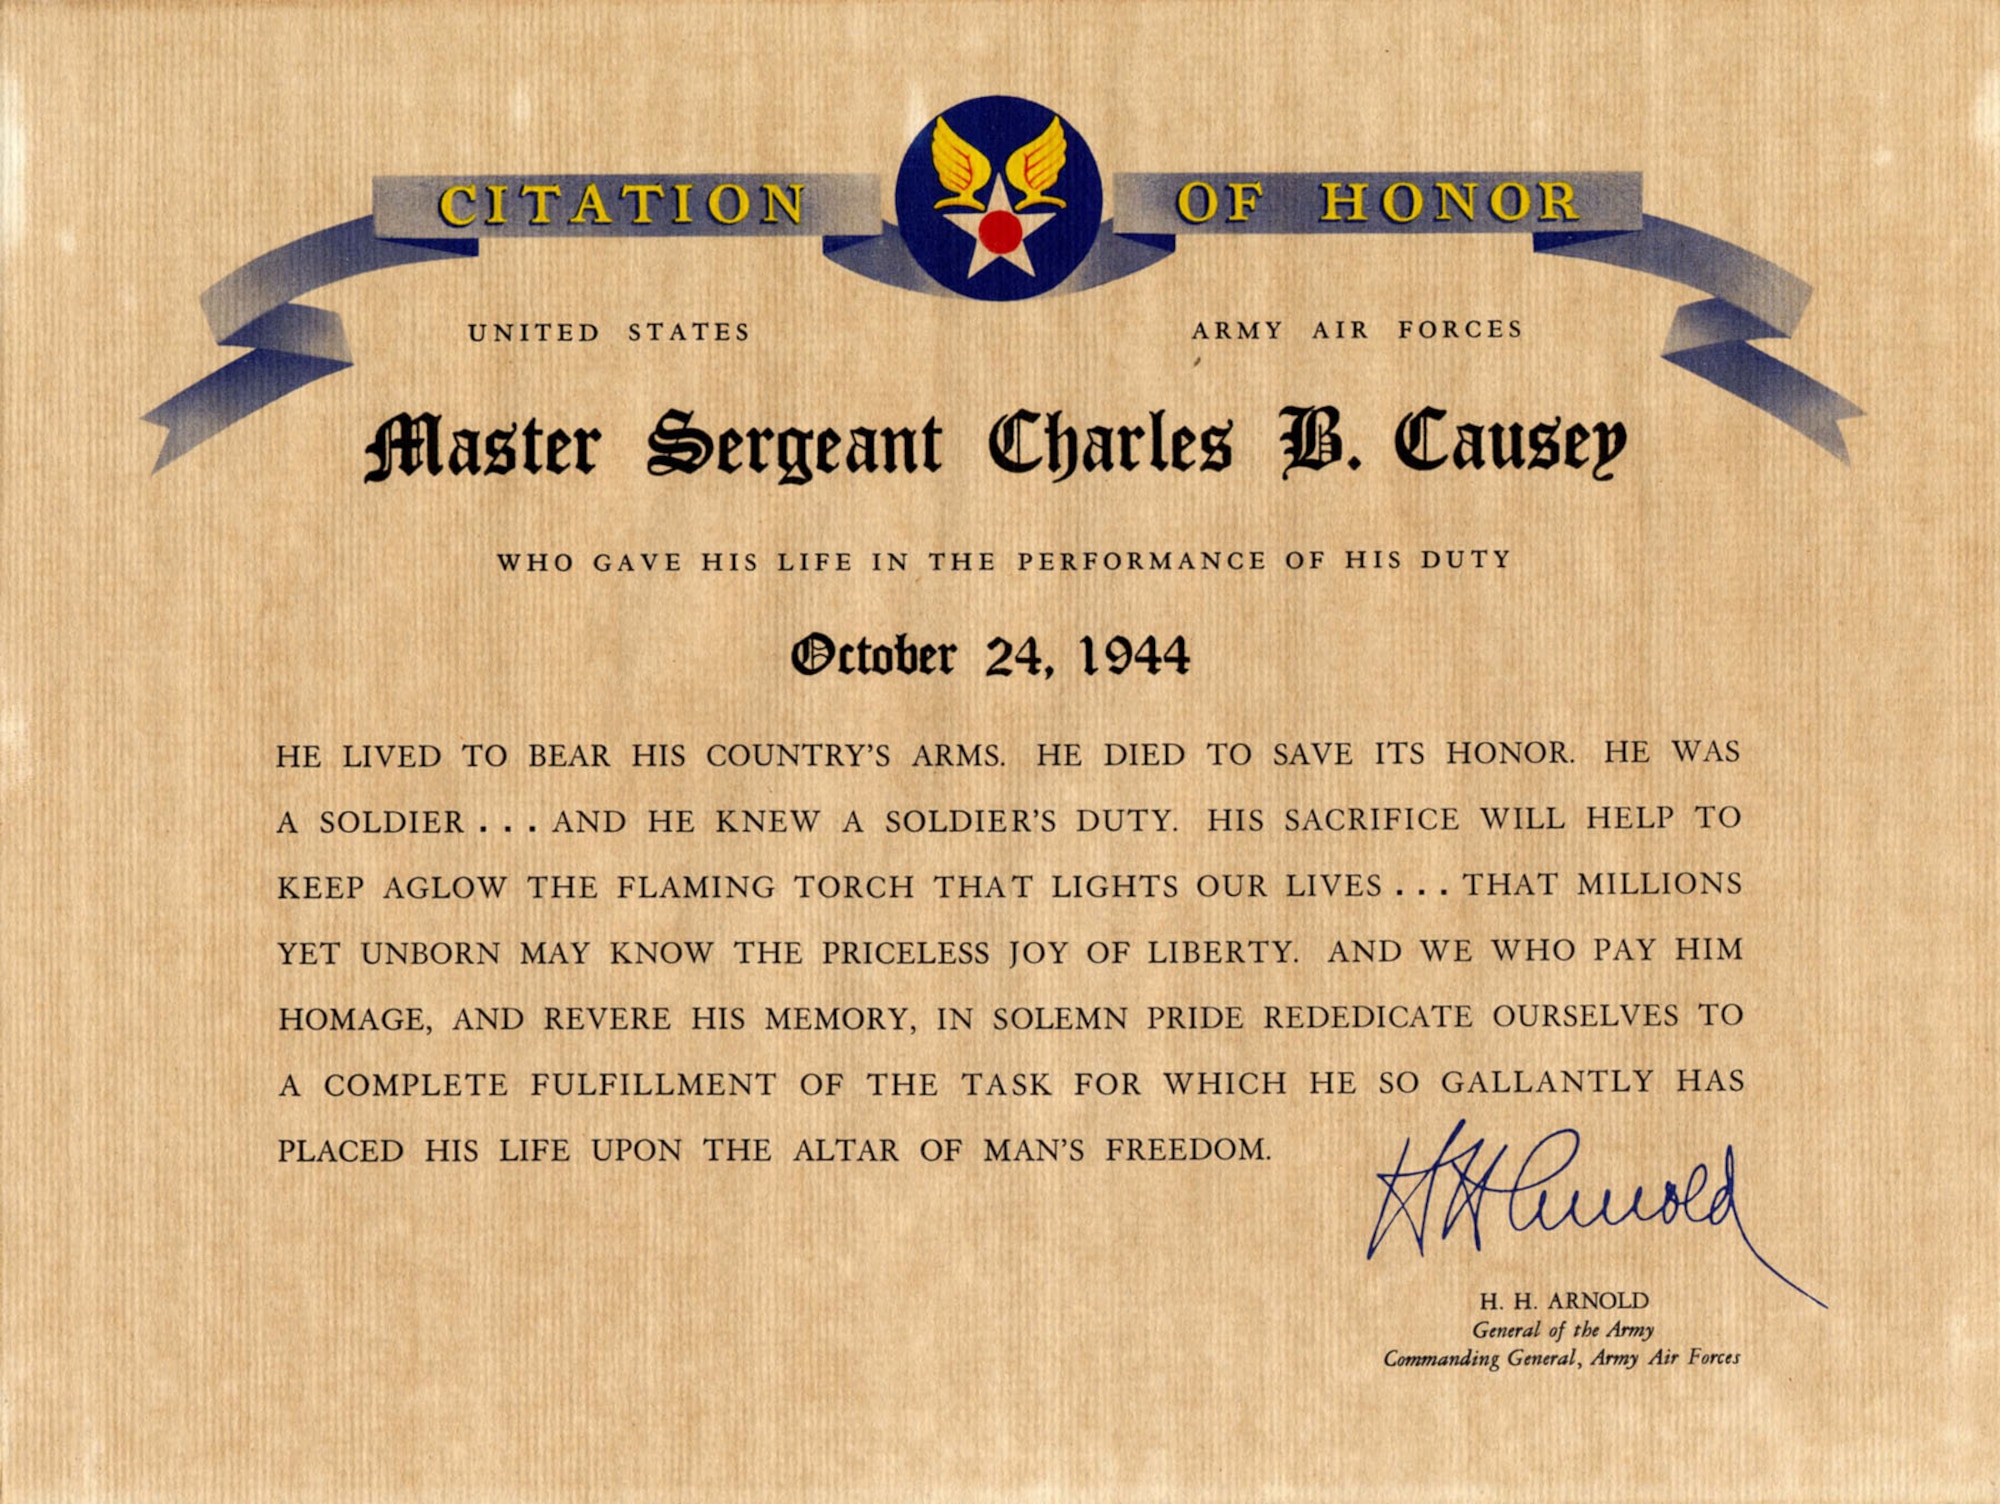 Citation of Honor for Master Sgt. Charles B. Causey. (U.S. Air Force photo)